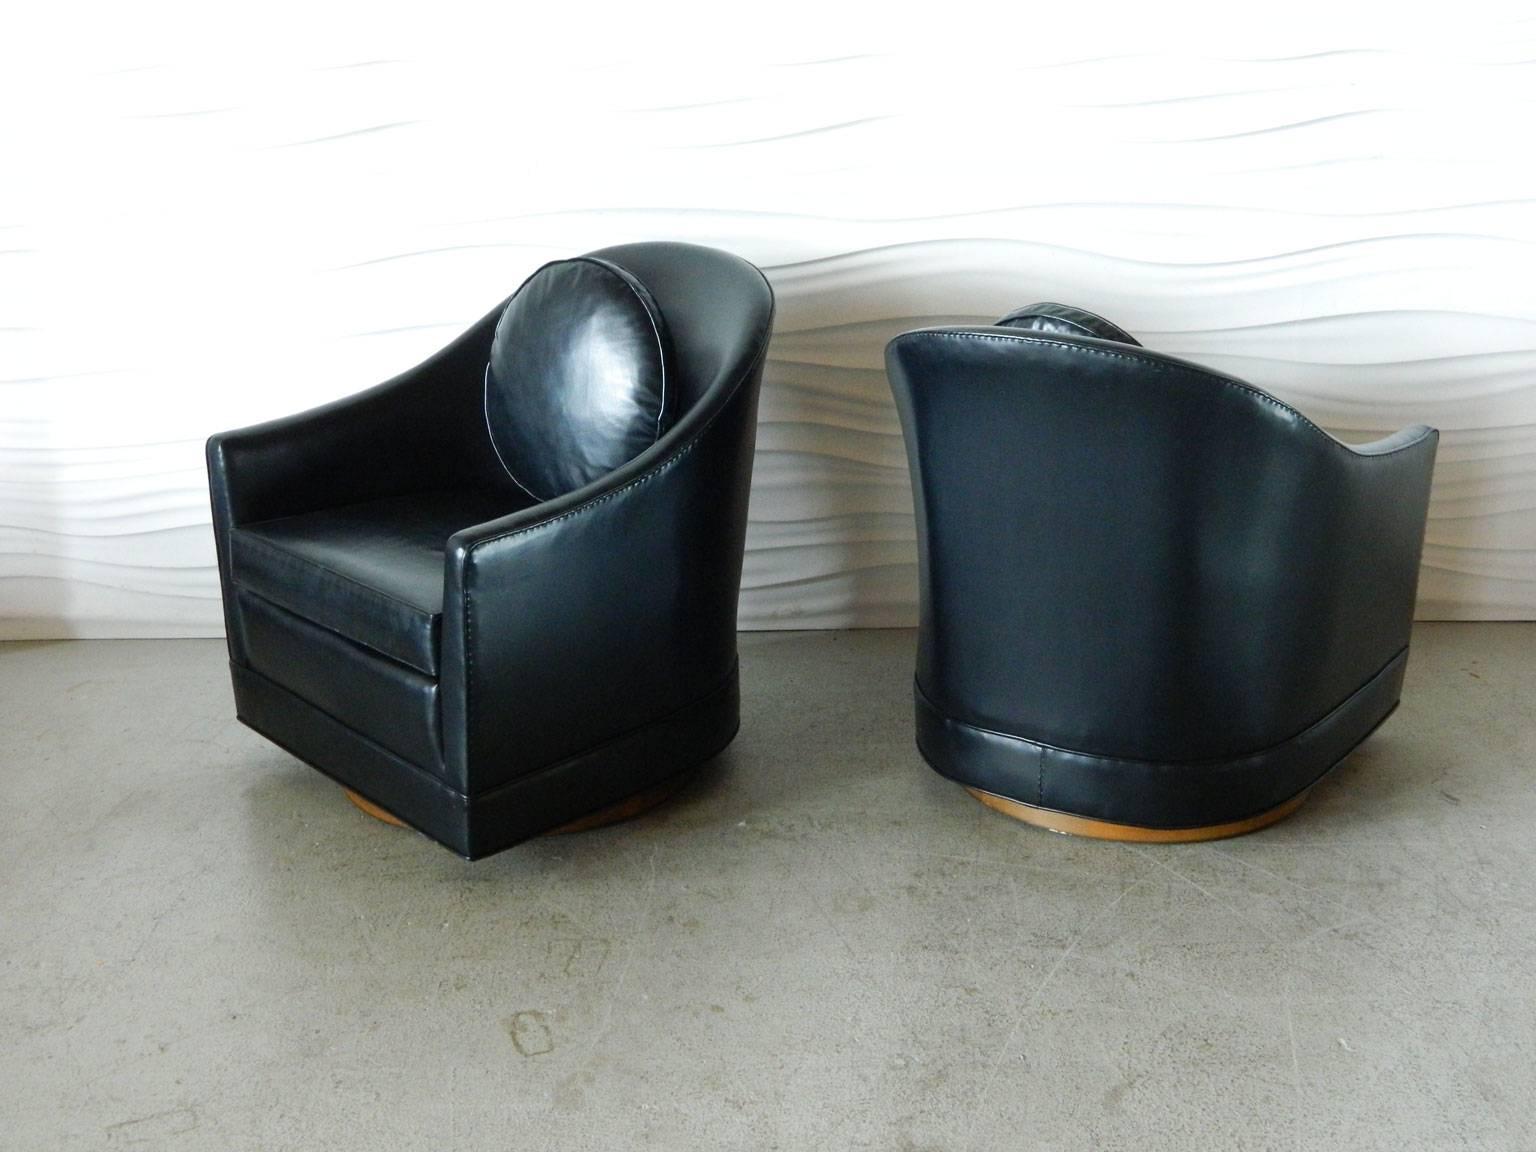 Handsome pair of Harvey Probber swivel chairs with curved backs.